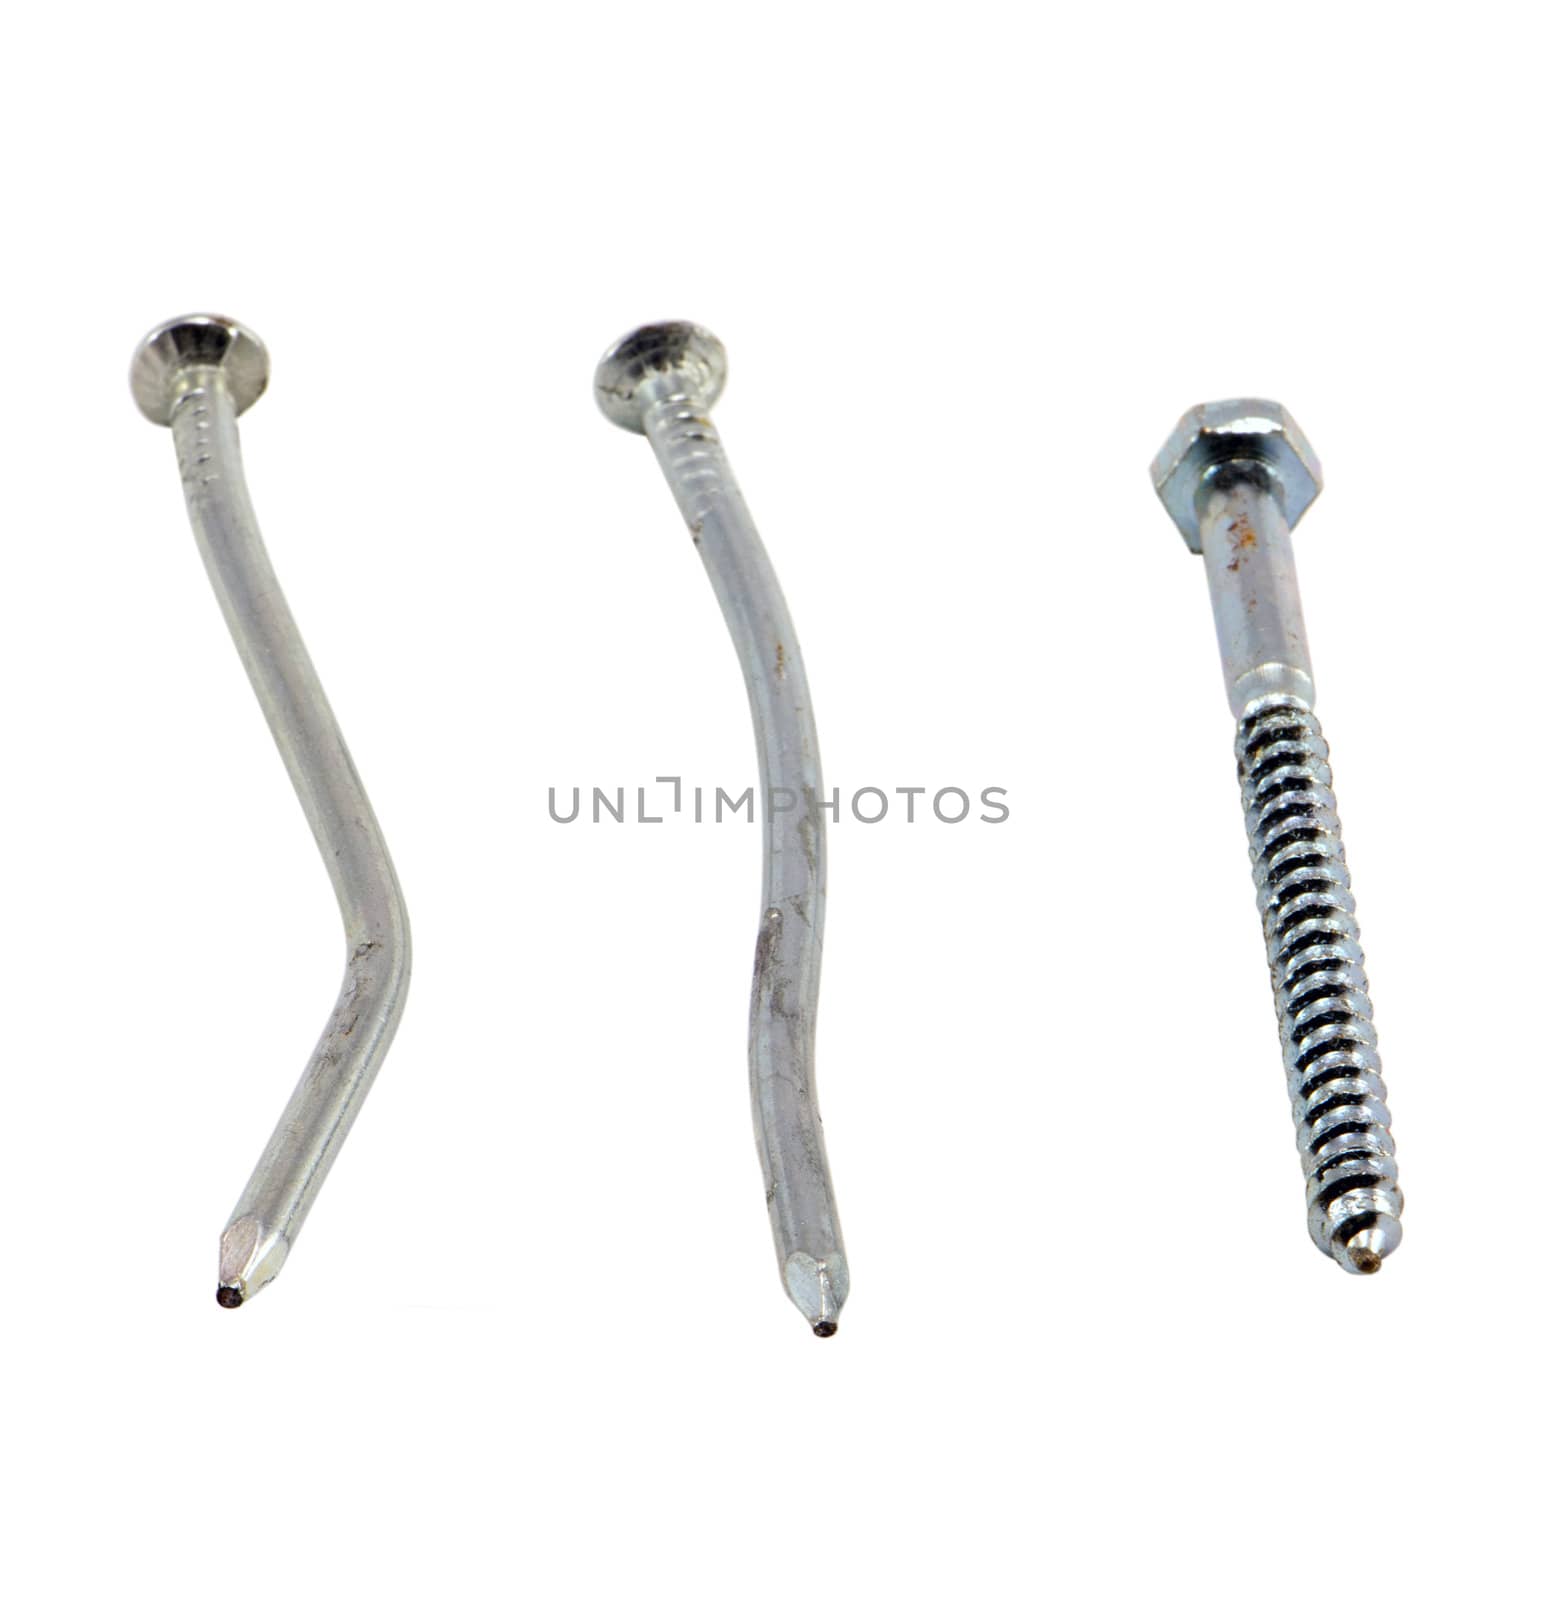 nails hammered bend screw bolt on white by sauletas